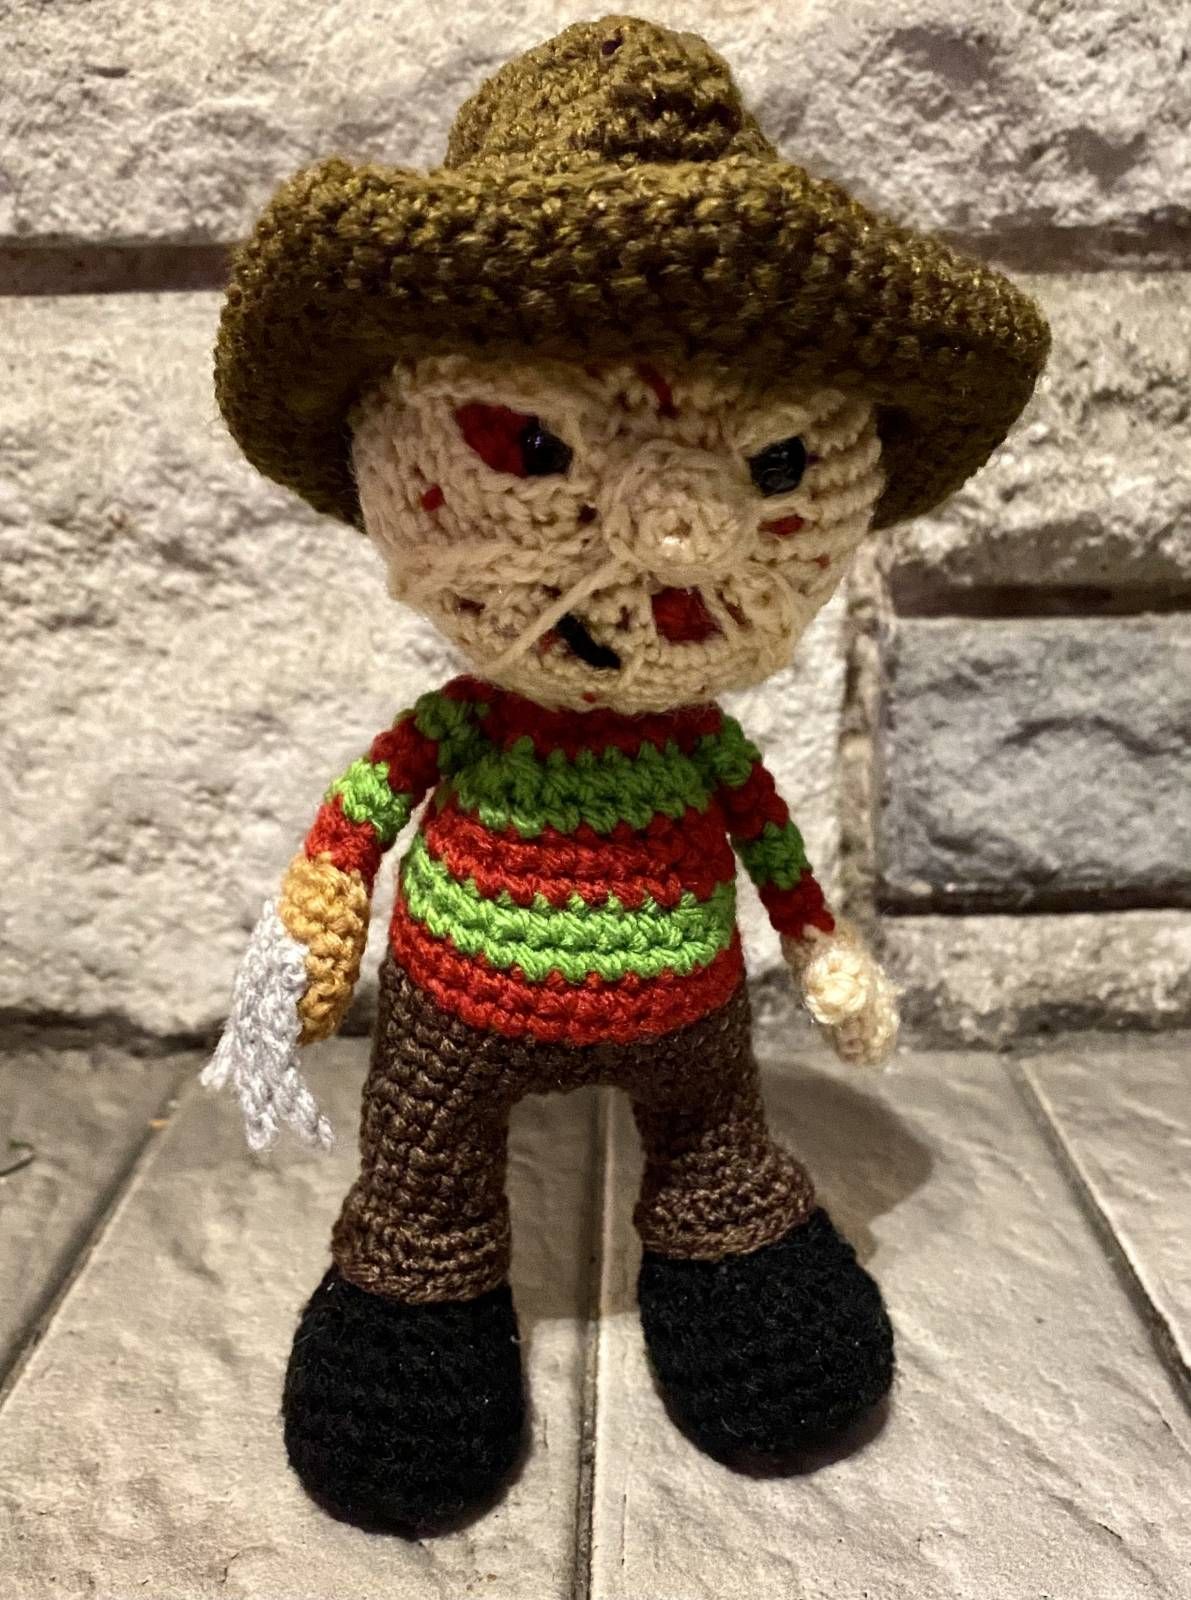 Crochet Amigurumi Freddy Krueger Pattern Review by Sarah Murphy for Cottontail and Whiskers